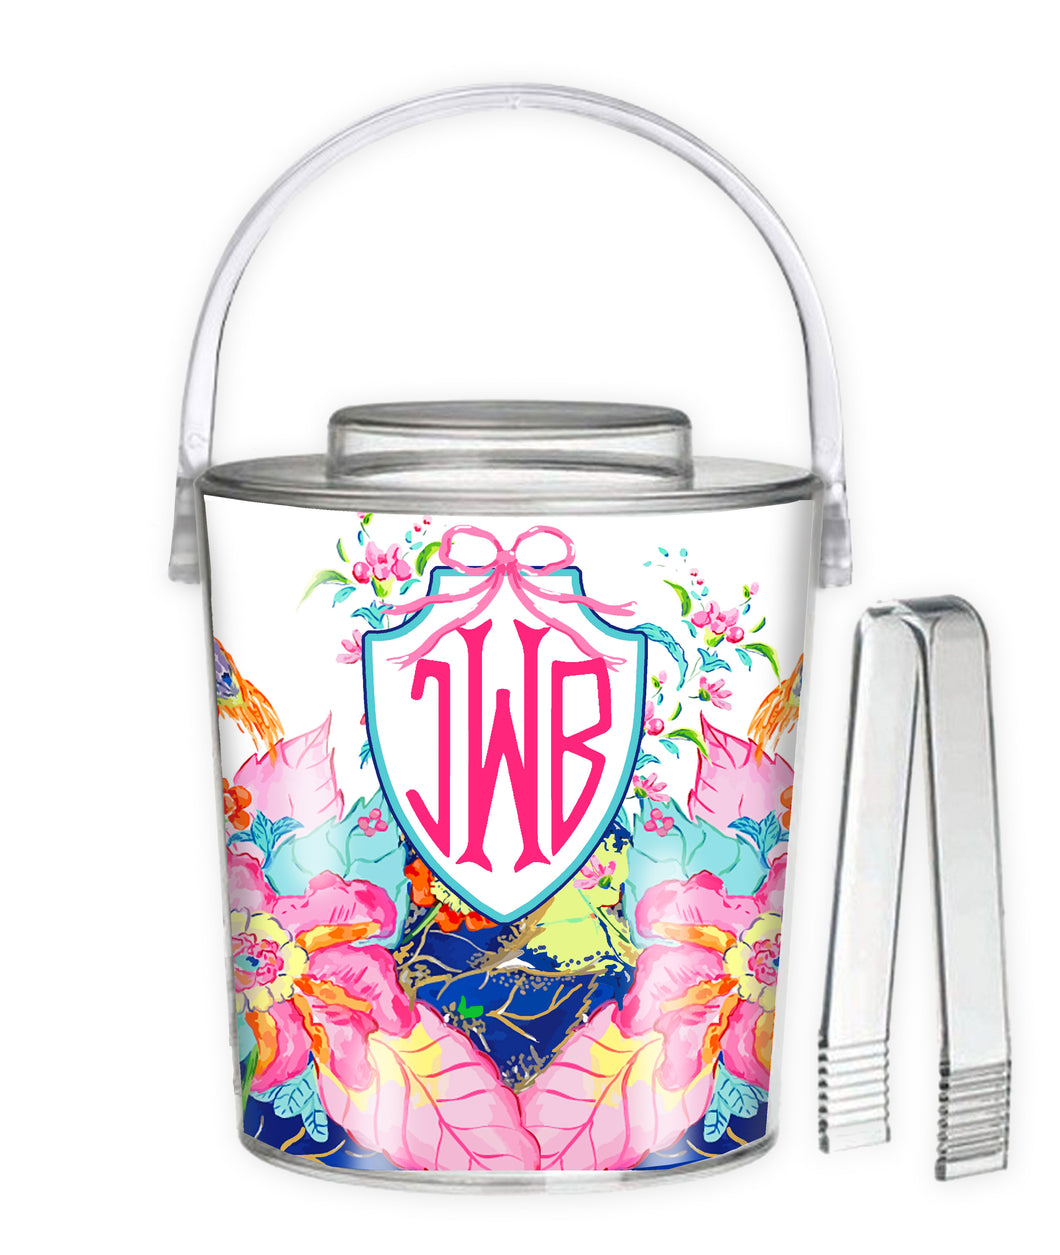 Tobacco Leaf - Inspired Personalized, 3 Qt. Acrylic Ice Bucket